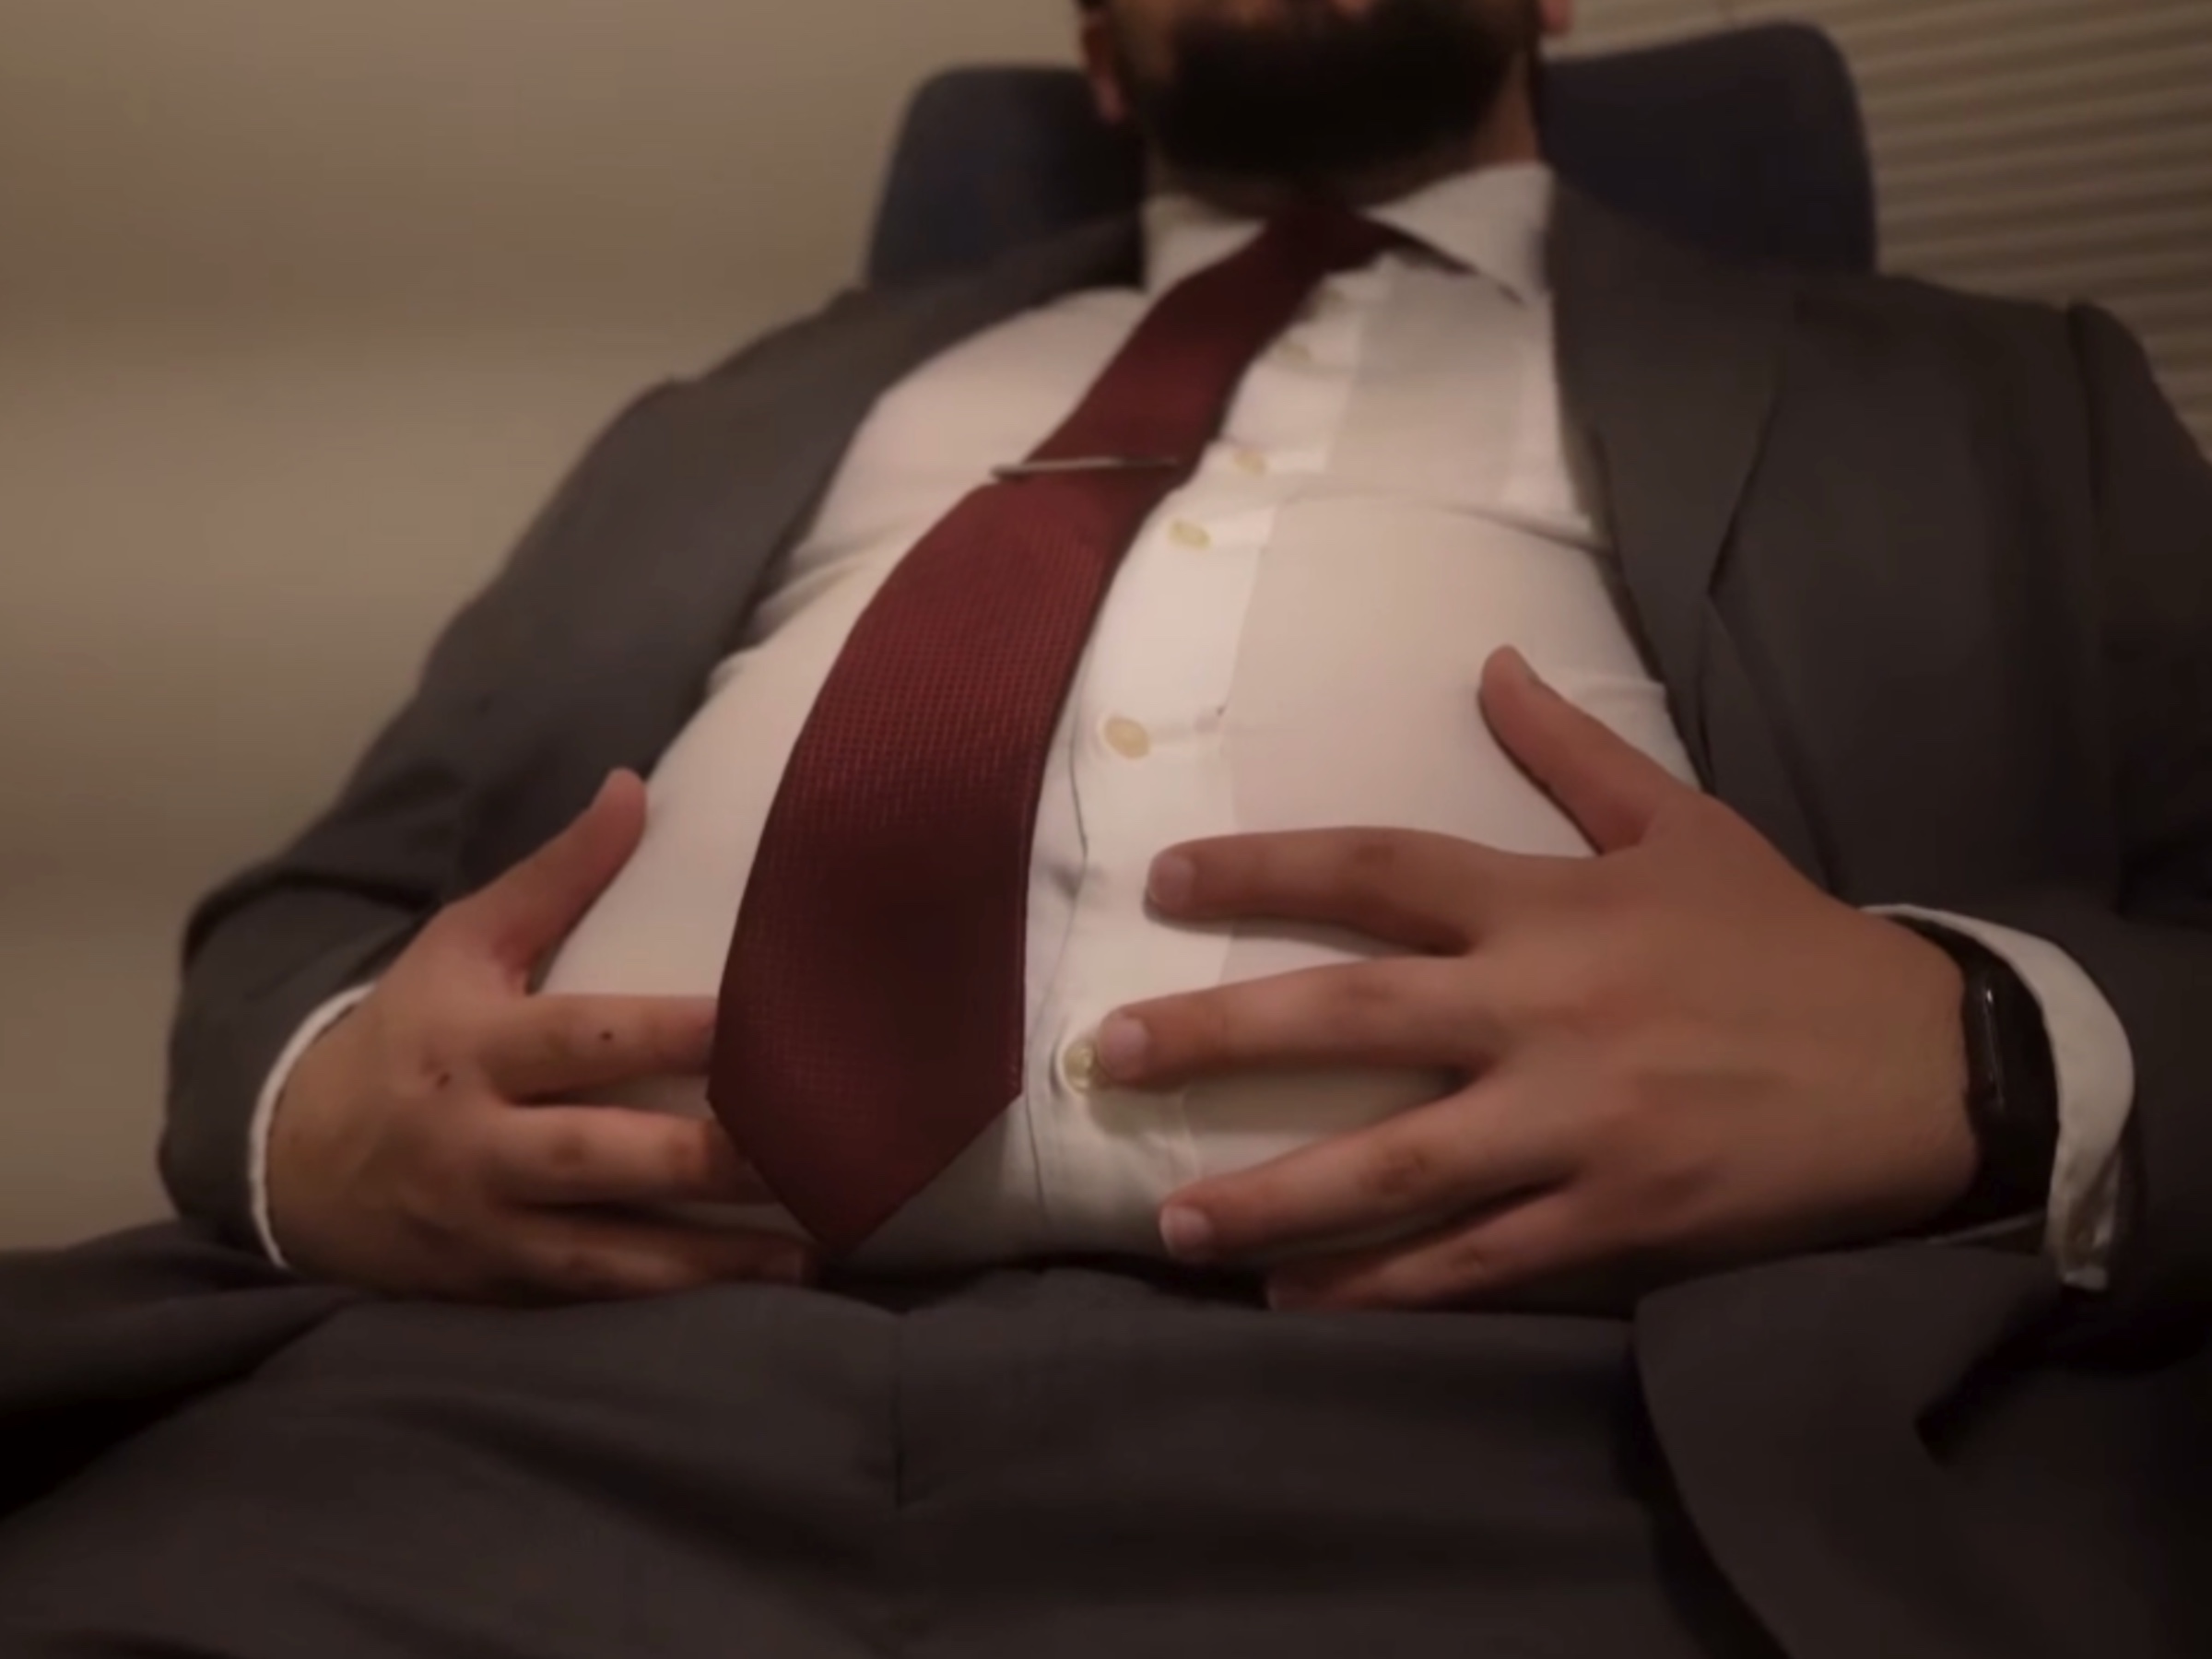 Fatties Punishment, Tight Suited Belly Play (Full)